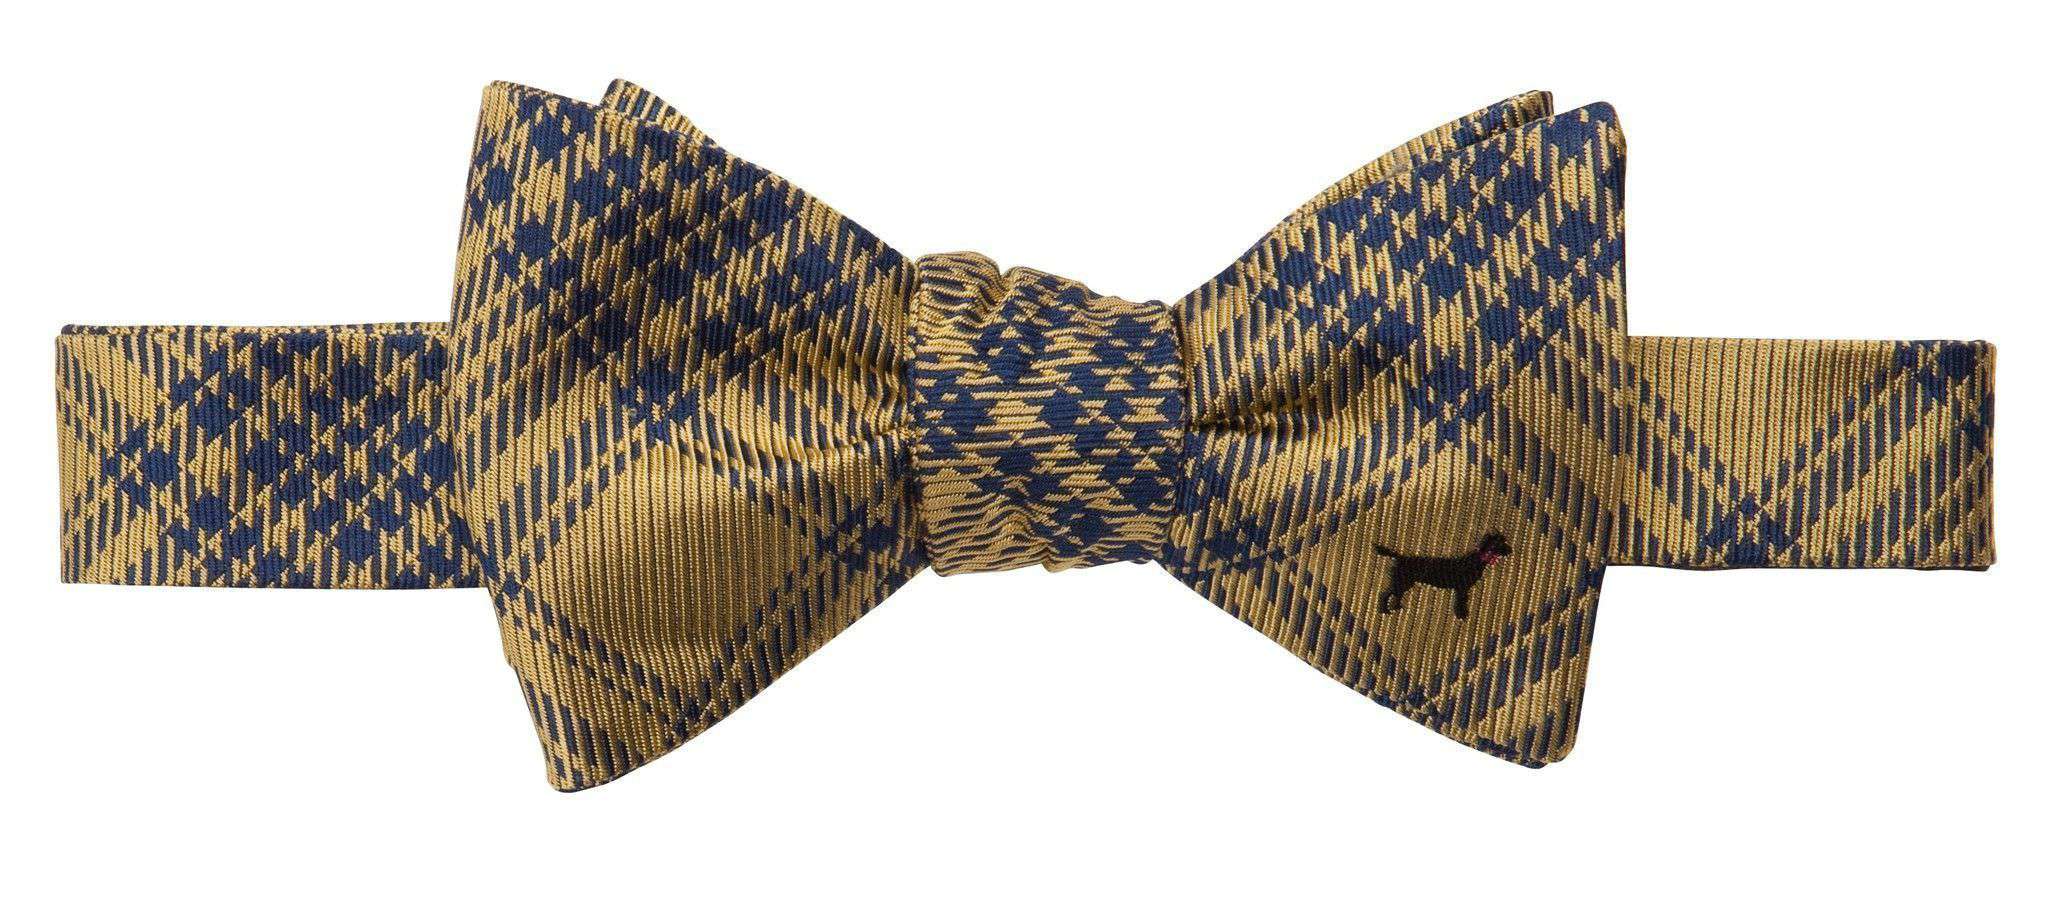 Black Lab Bow Tie in Yellow by Southern Proper - Country Club Prep